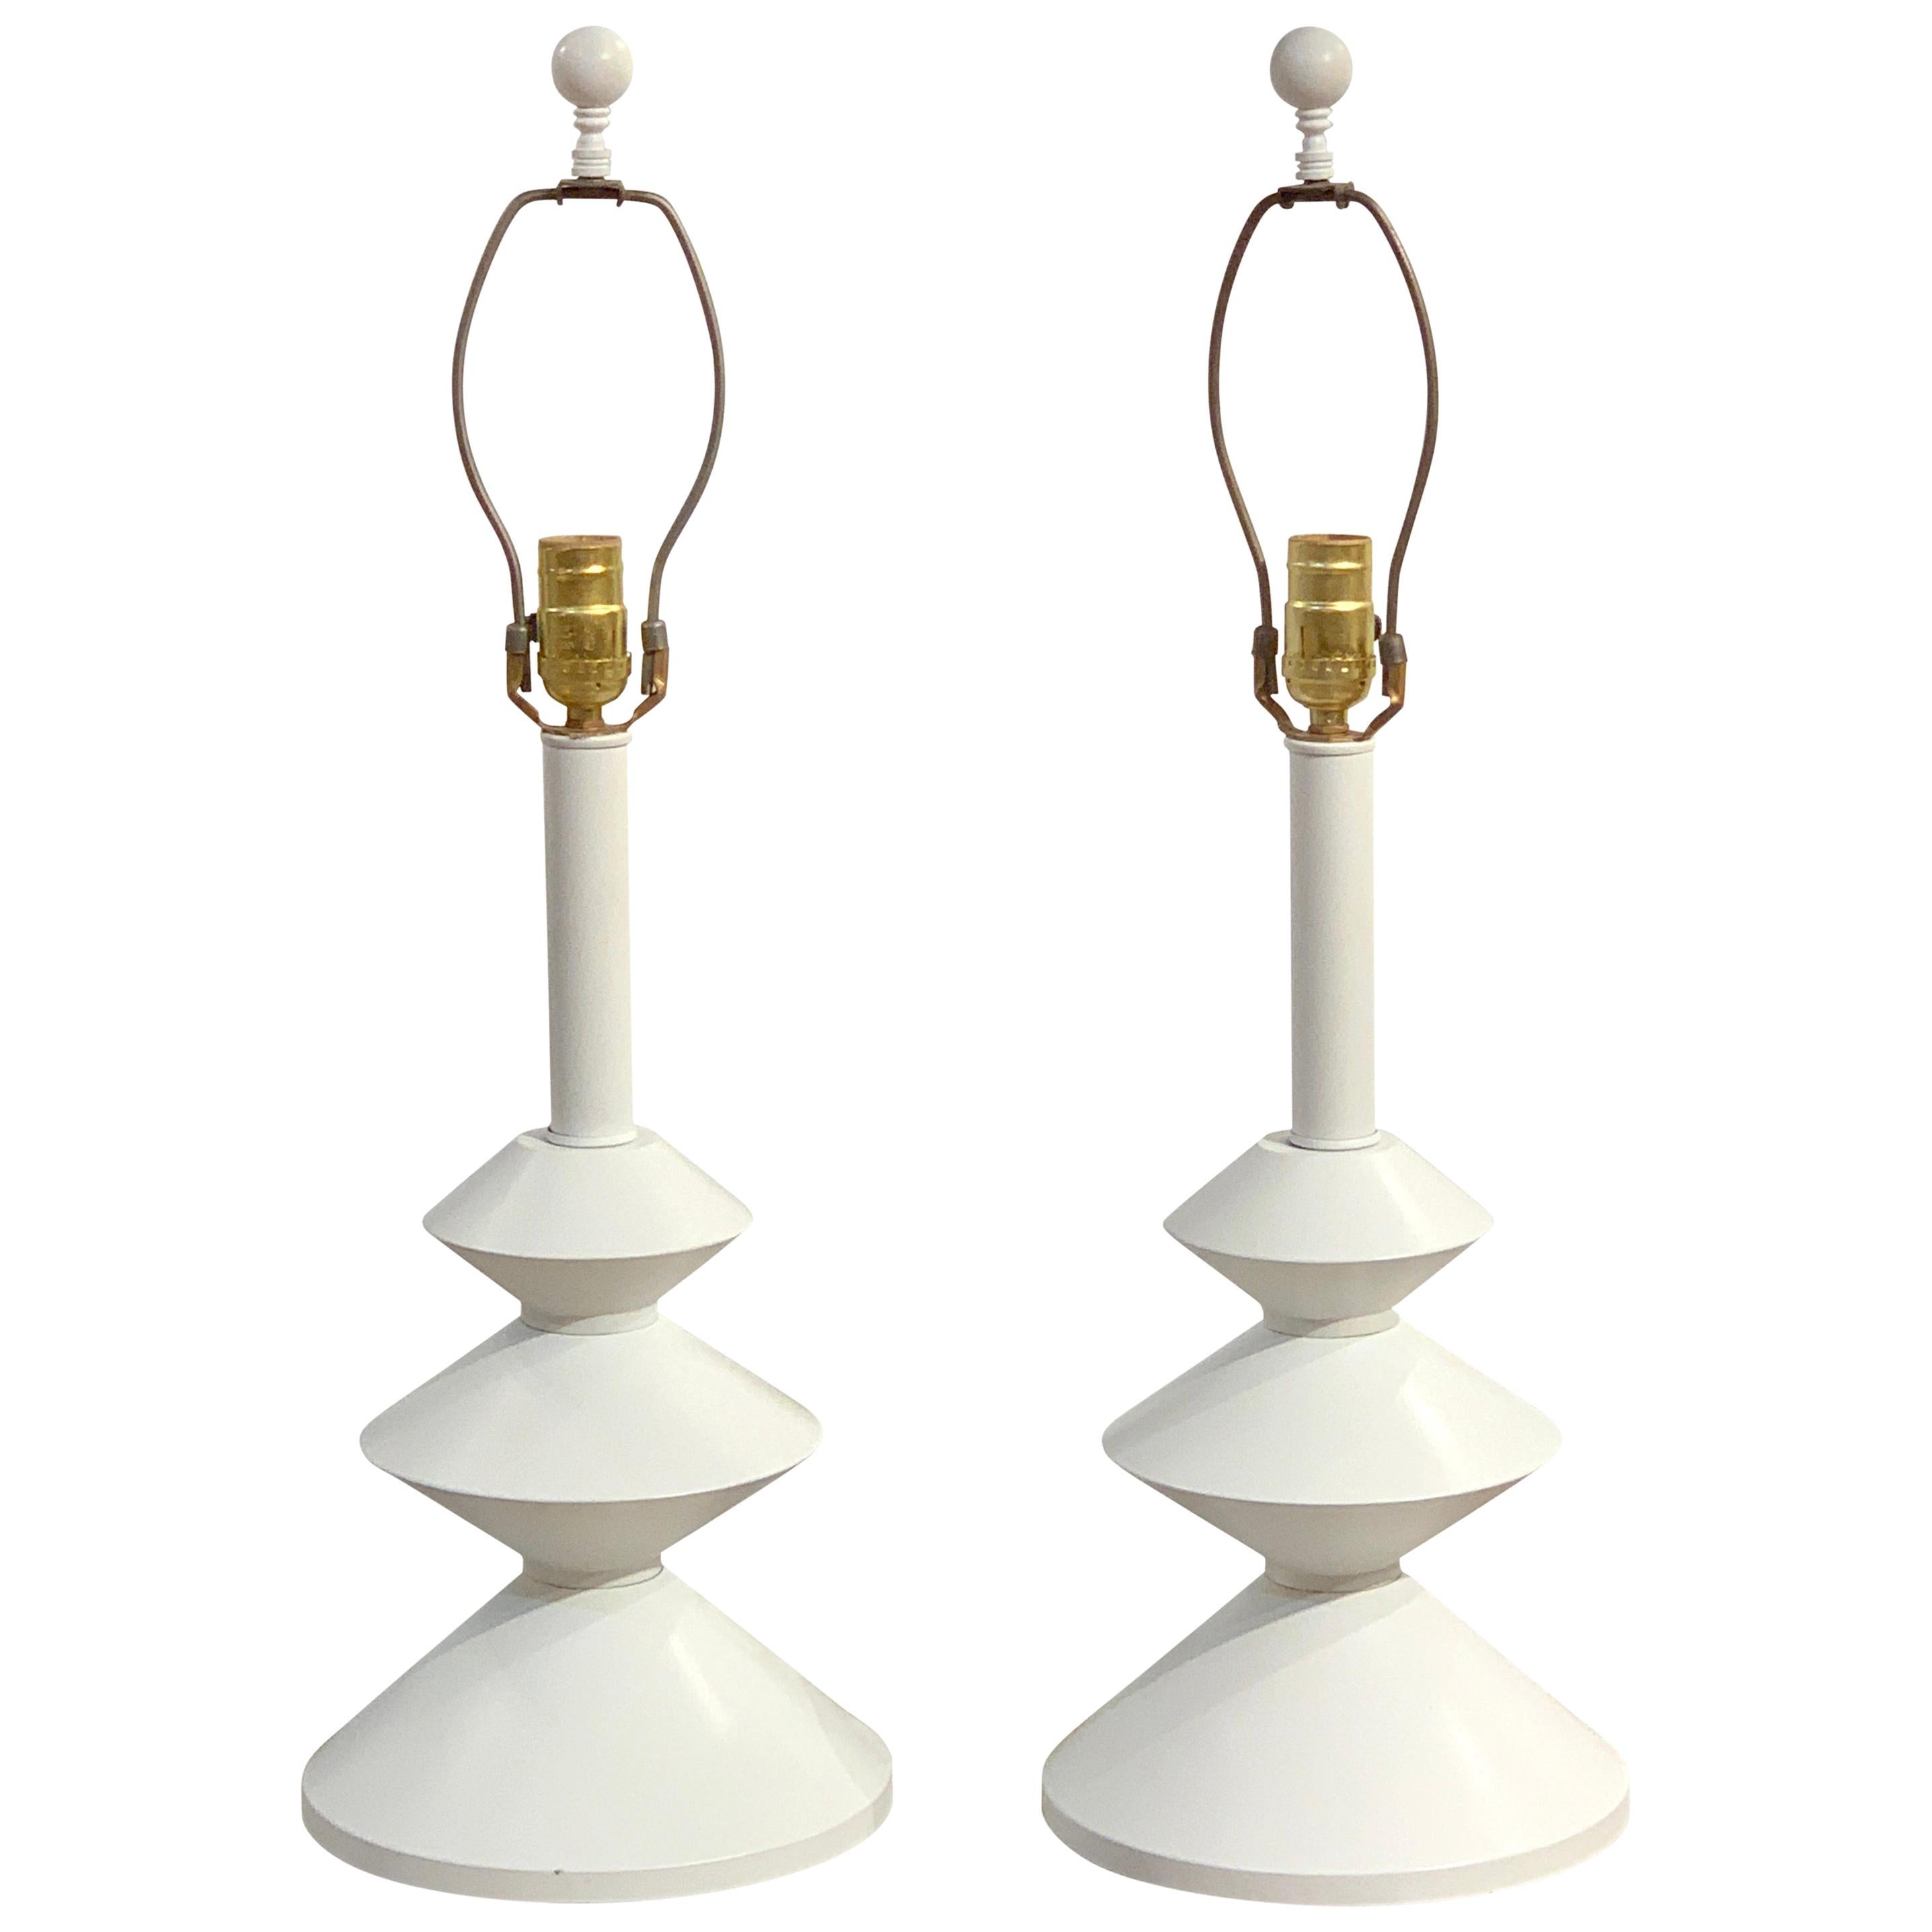 Pair of After, Alberto Giacometti Style Enameled Metal Sculptural Lamps For Sale